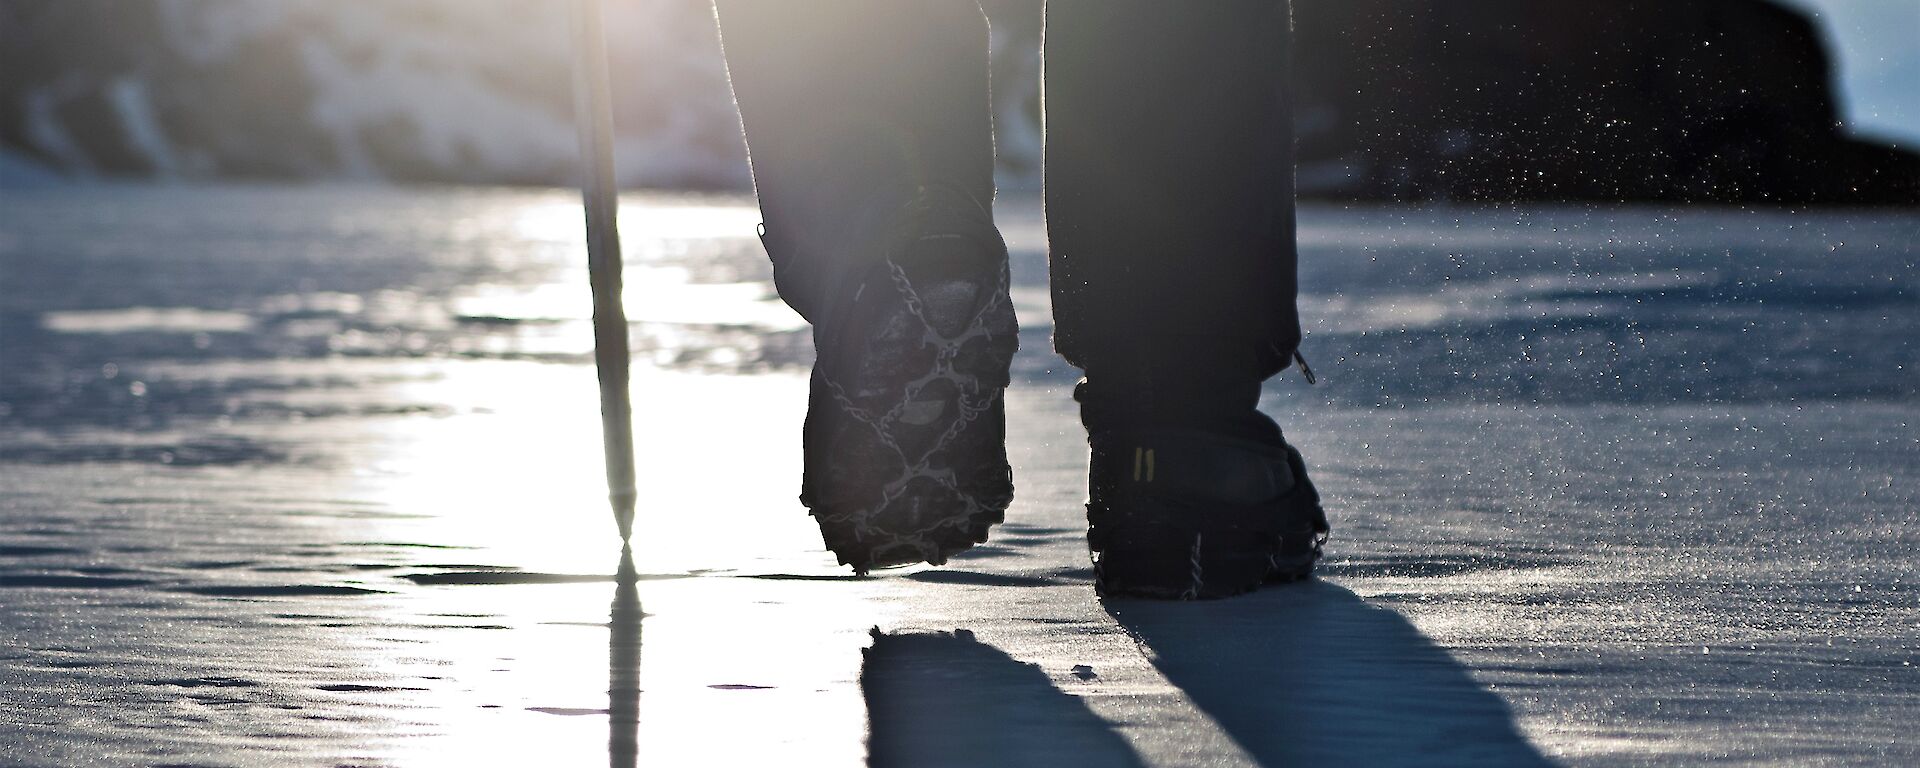 Silhouette of feet and legs from behind walking on ice.